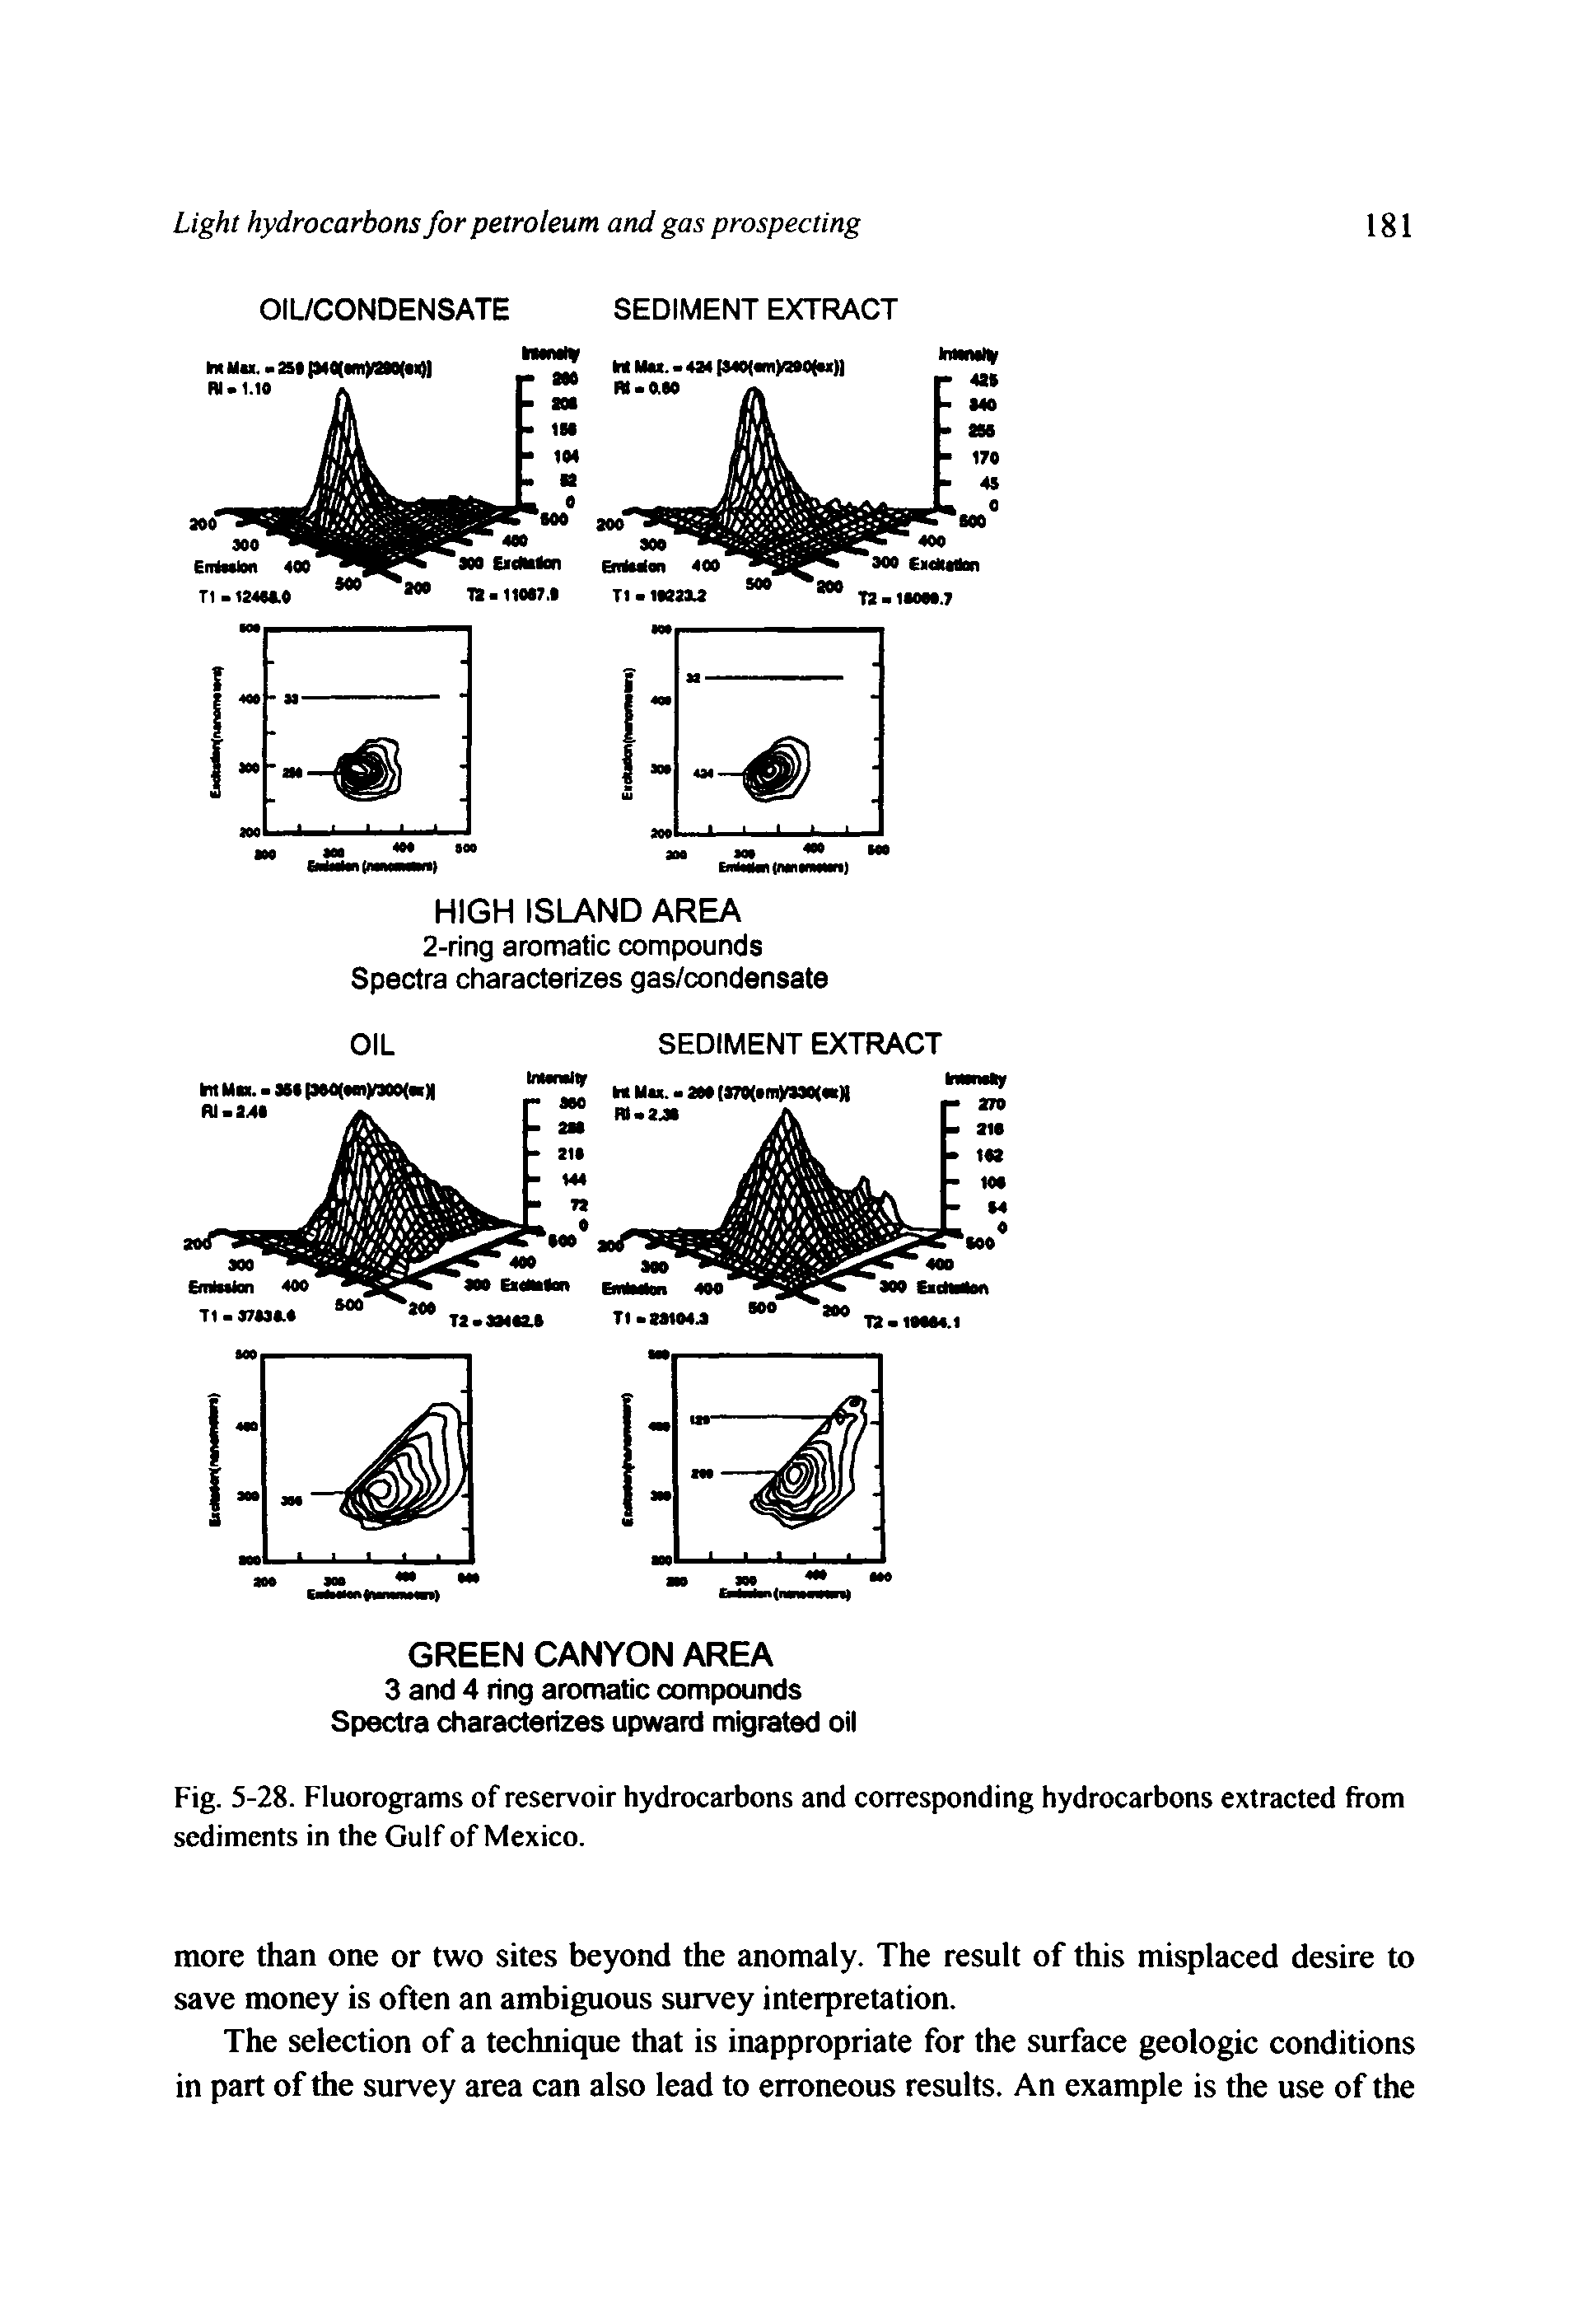 Fig. 5-28. Fluorograms of reservoir hydrocarbons and corresponding hydrocarbons extracted from sediments in the Gulf of Mexico.